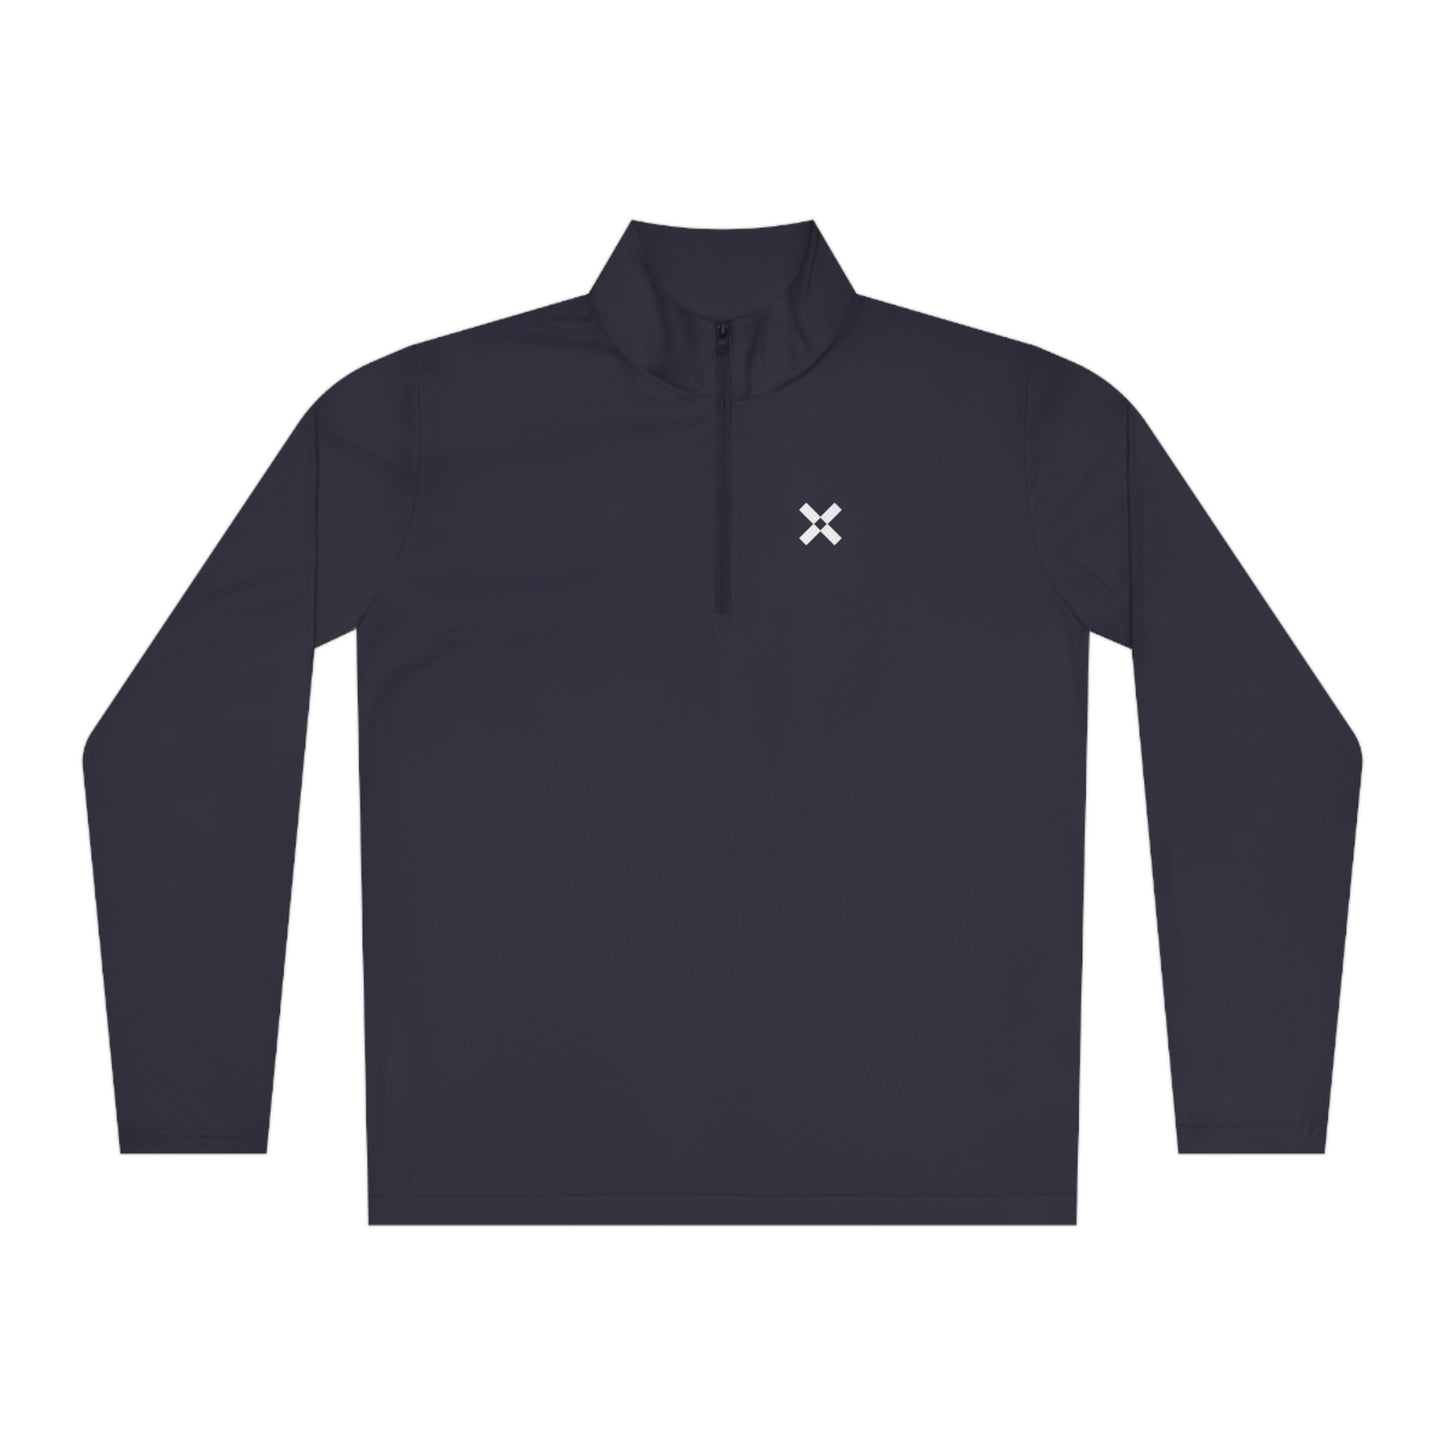 The Quintessential Quarter-Zip - Worn By Winners